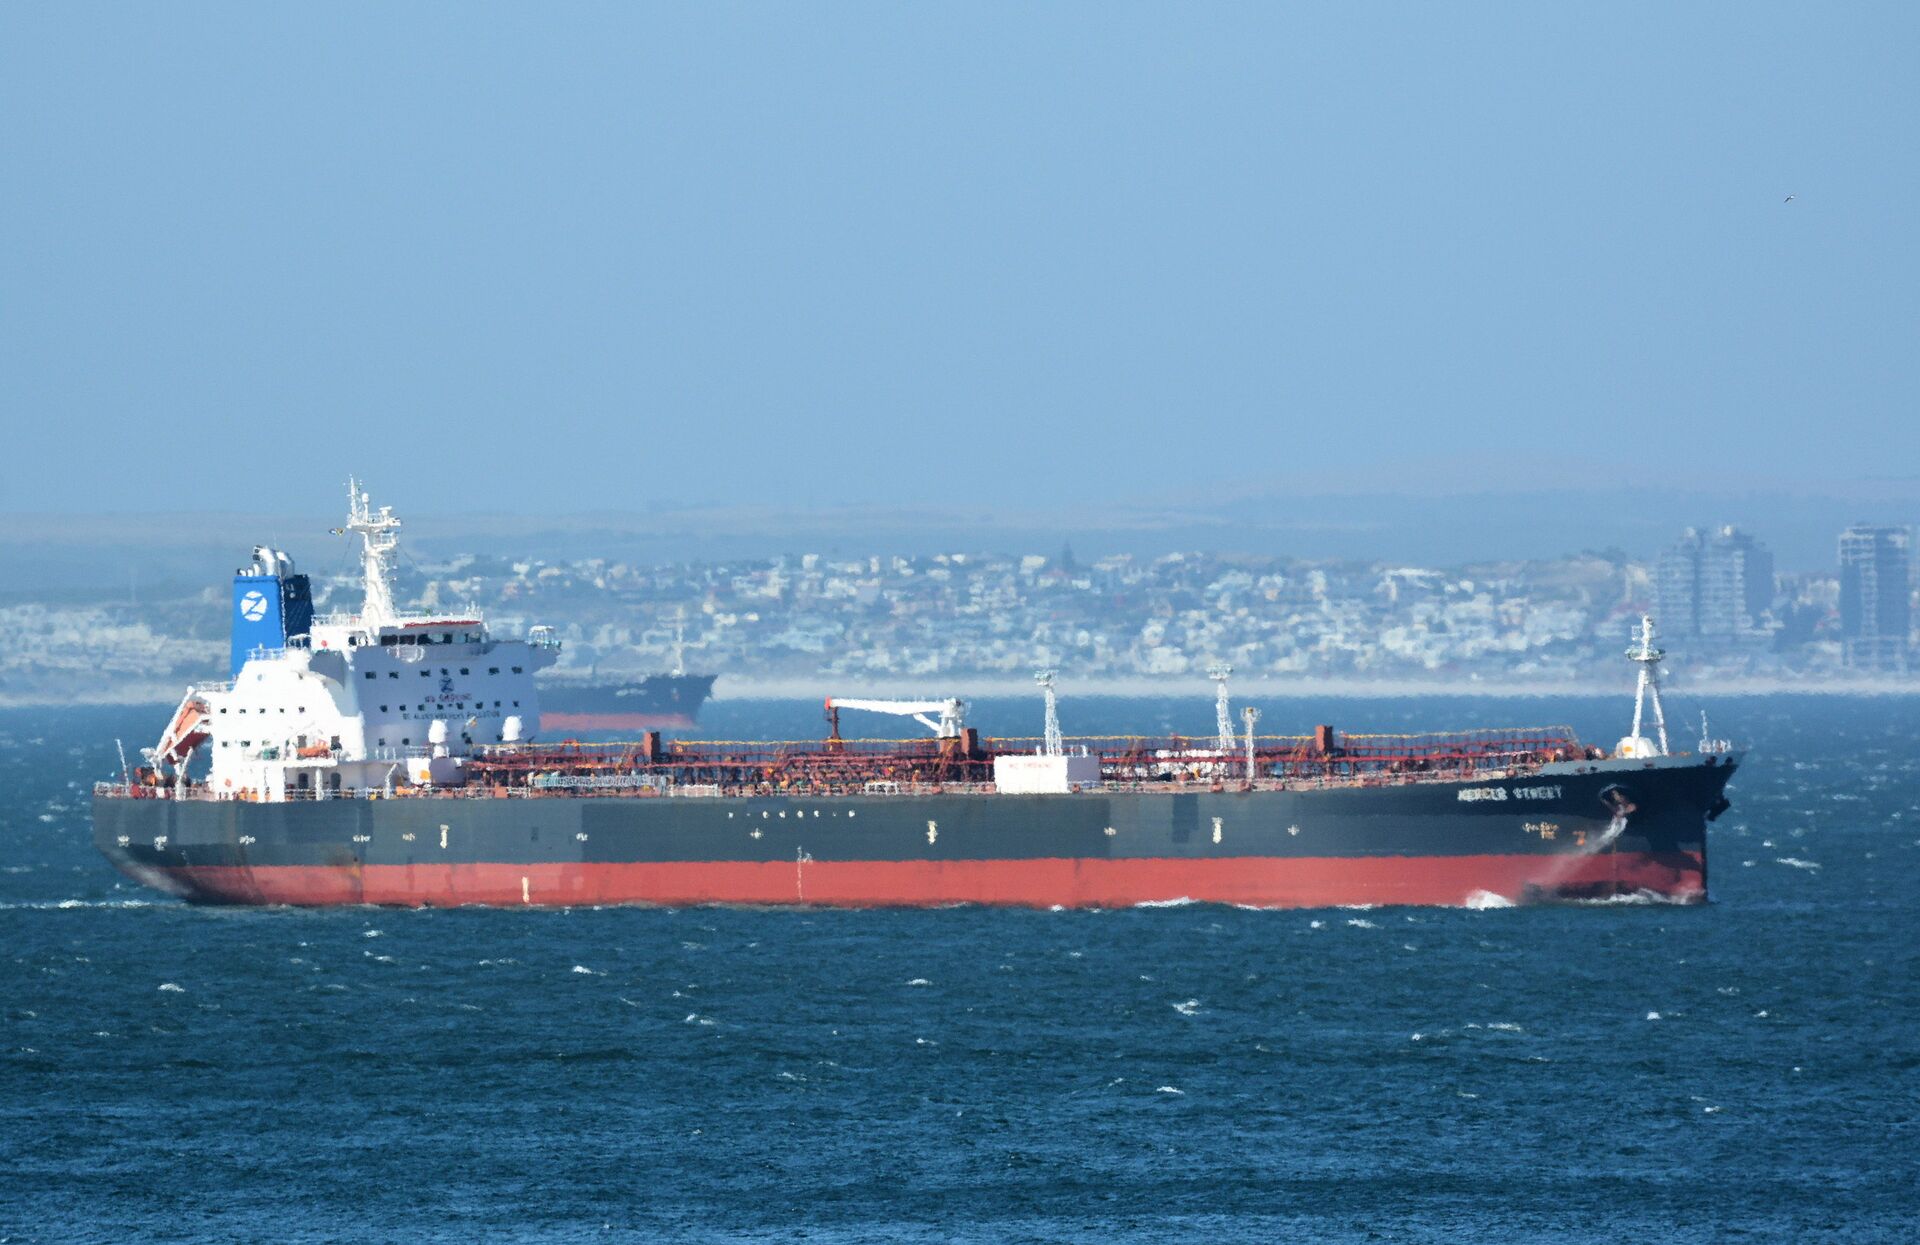 The Mercer Street, a Japanese-owned Liberian-flagged tanker managed by Israeli-owned Zodiac Maritime that was attacked off Oman coast as seen in Cape Town, South Africa, December 31, 2015  in this picture obtained from ship tracker website, MarineTraffic.com. Picture taken December 31, 2015.  Johan Victor/Handout via REUTERS THIS IMAGE HAS BEEN SUPPLIED BY A THIRD PARTY. MANDATORY CREDIT. NO RESALES. NO ARCHIVES. - Sputnik International, 1920, 07.09.2021